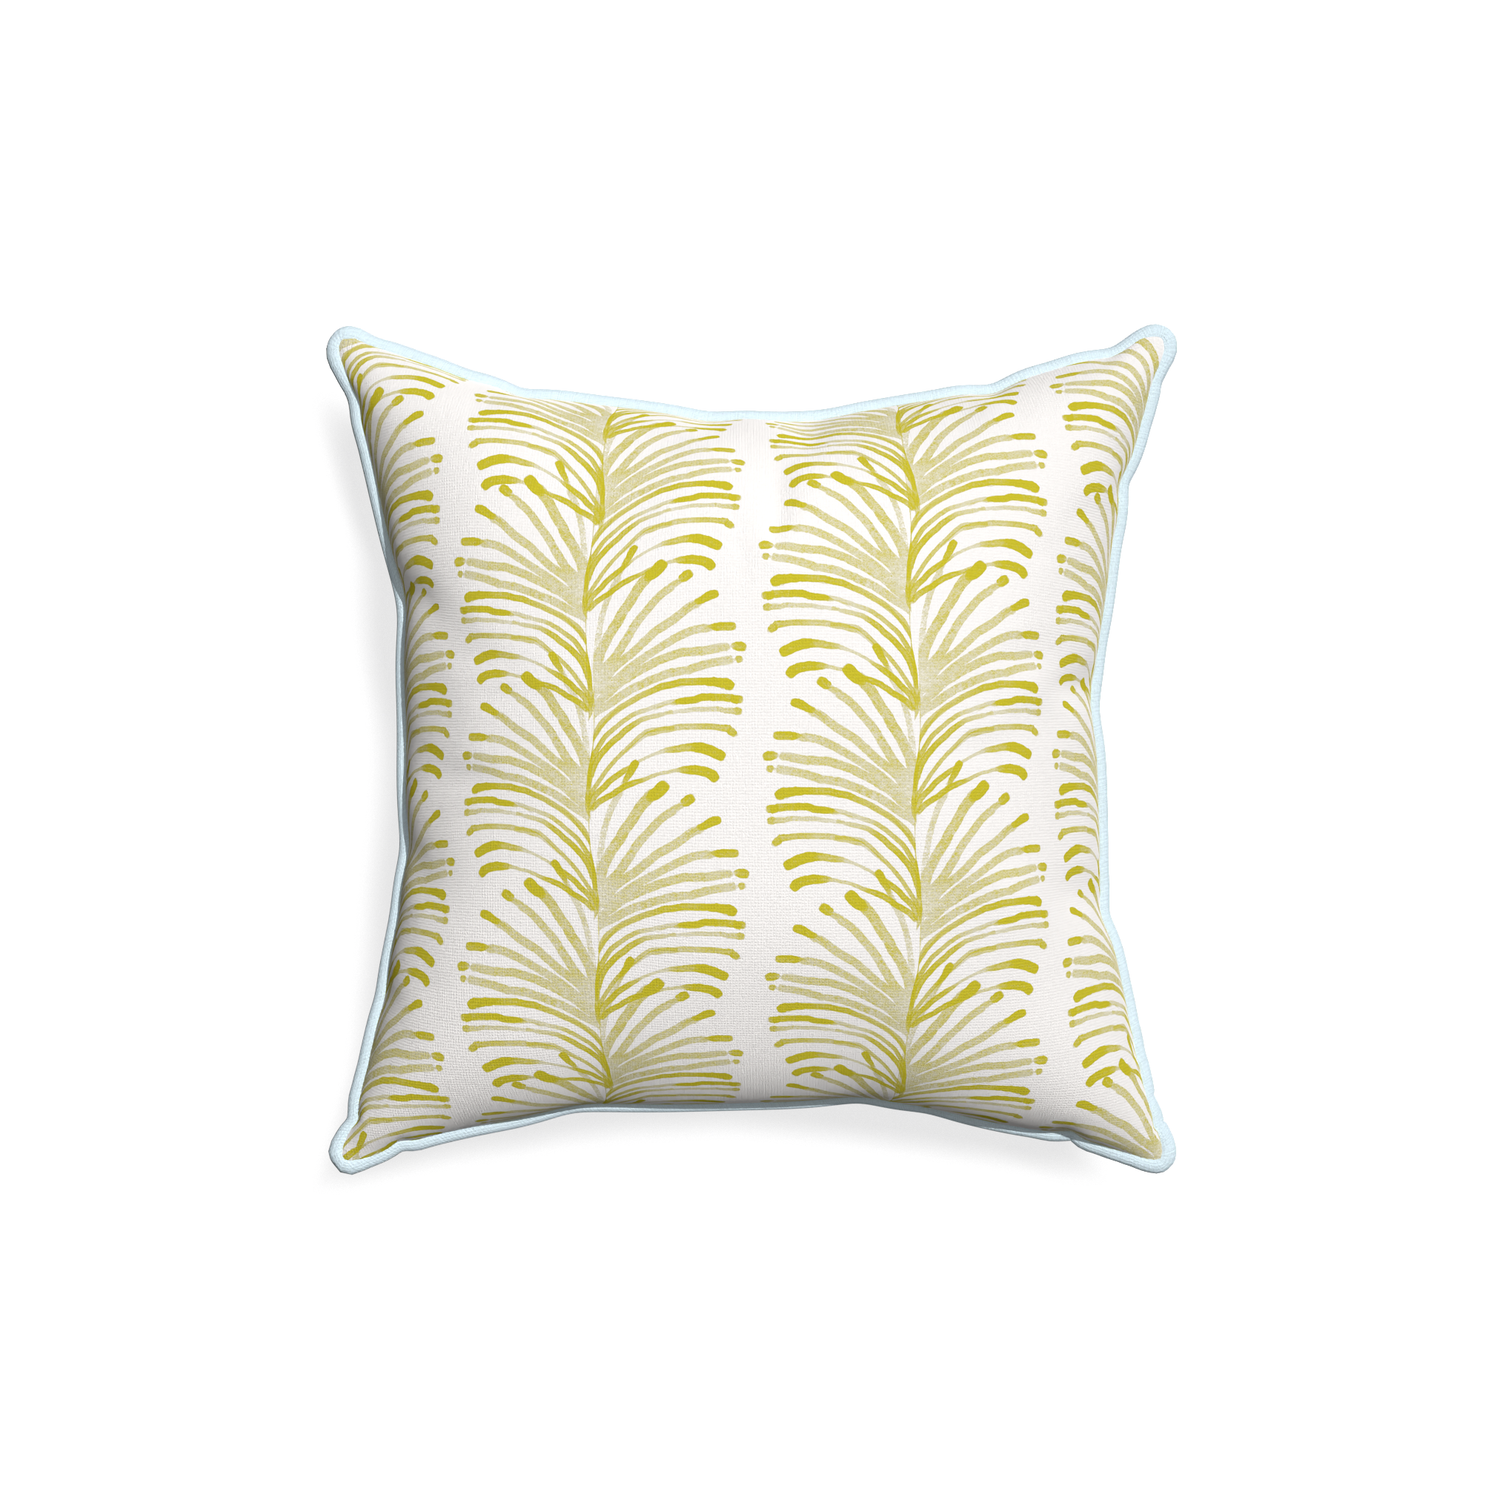 18-square emma chartreuse custom yellow stripe chartreusepillow with powder piping on white background